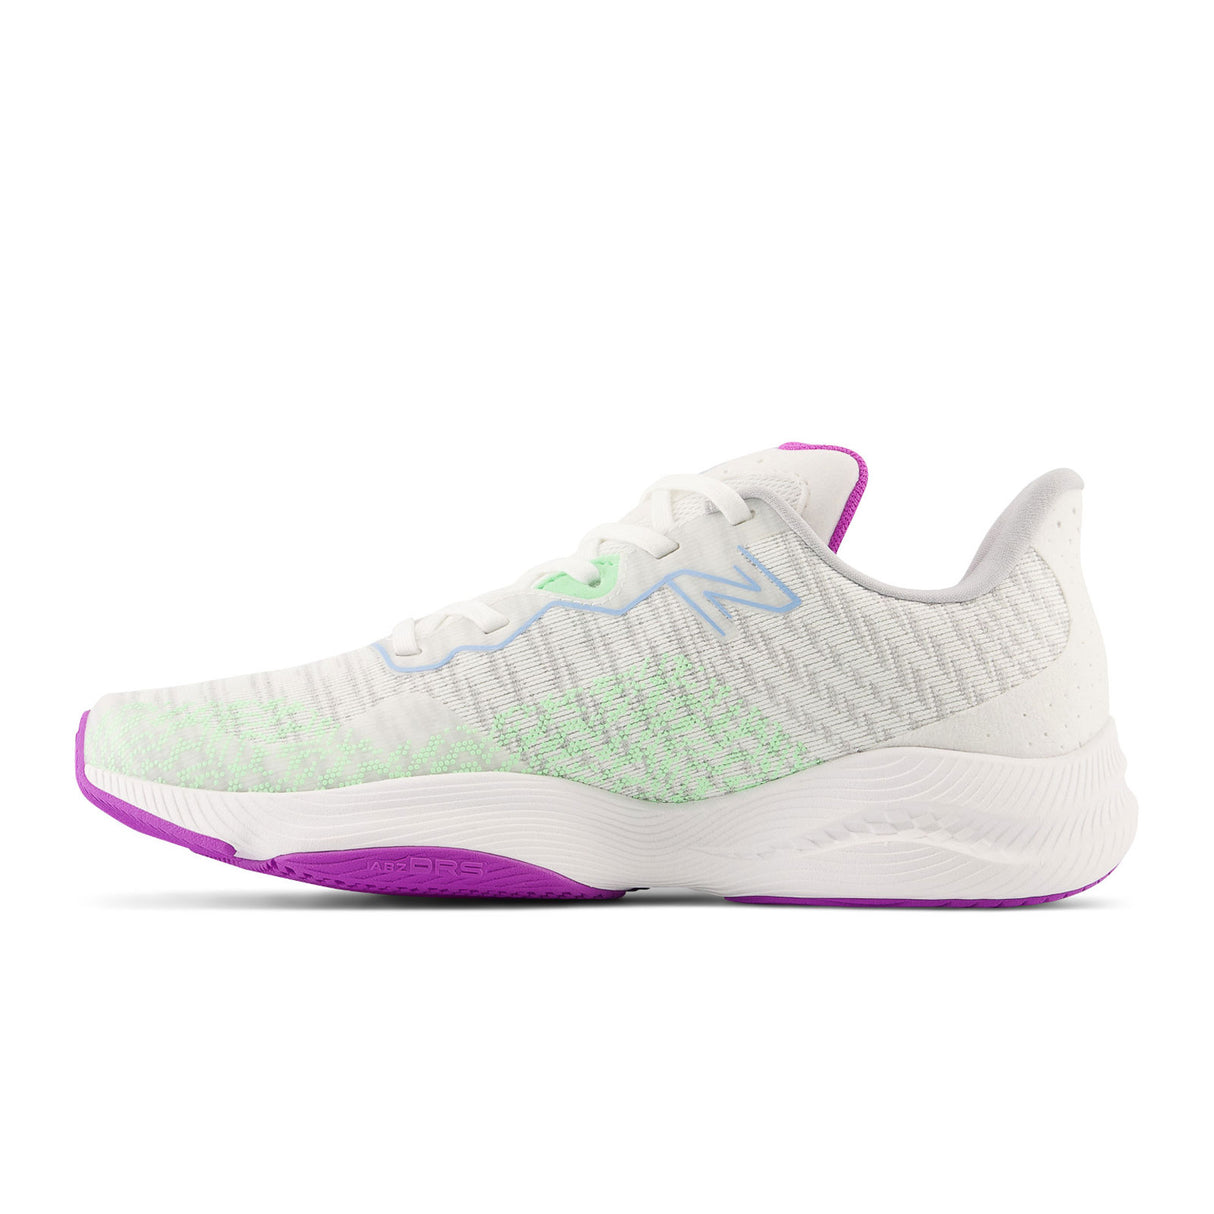 New Balance FuelCell Shift TR 2 Court Shoe (Women) - White Athletic - Running - Stability - The Heel Shoe Fitters